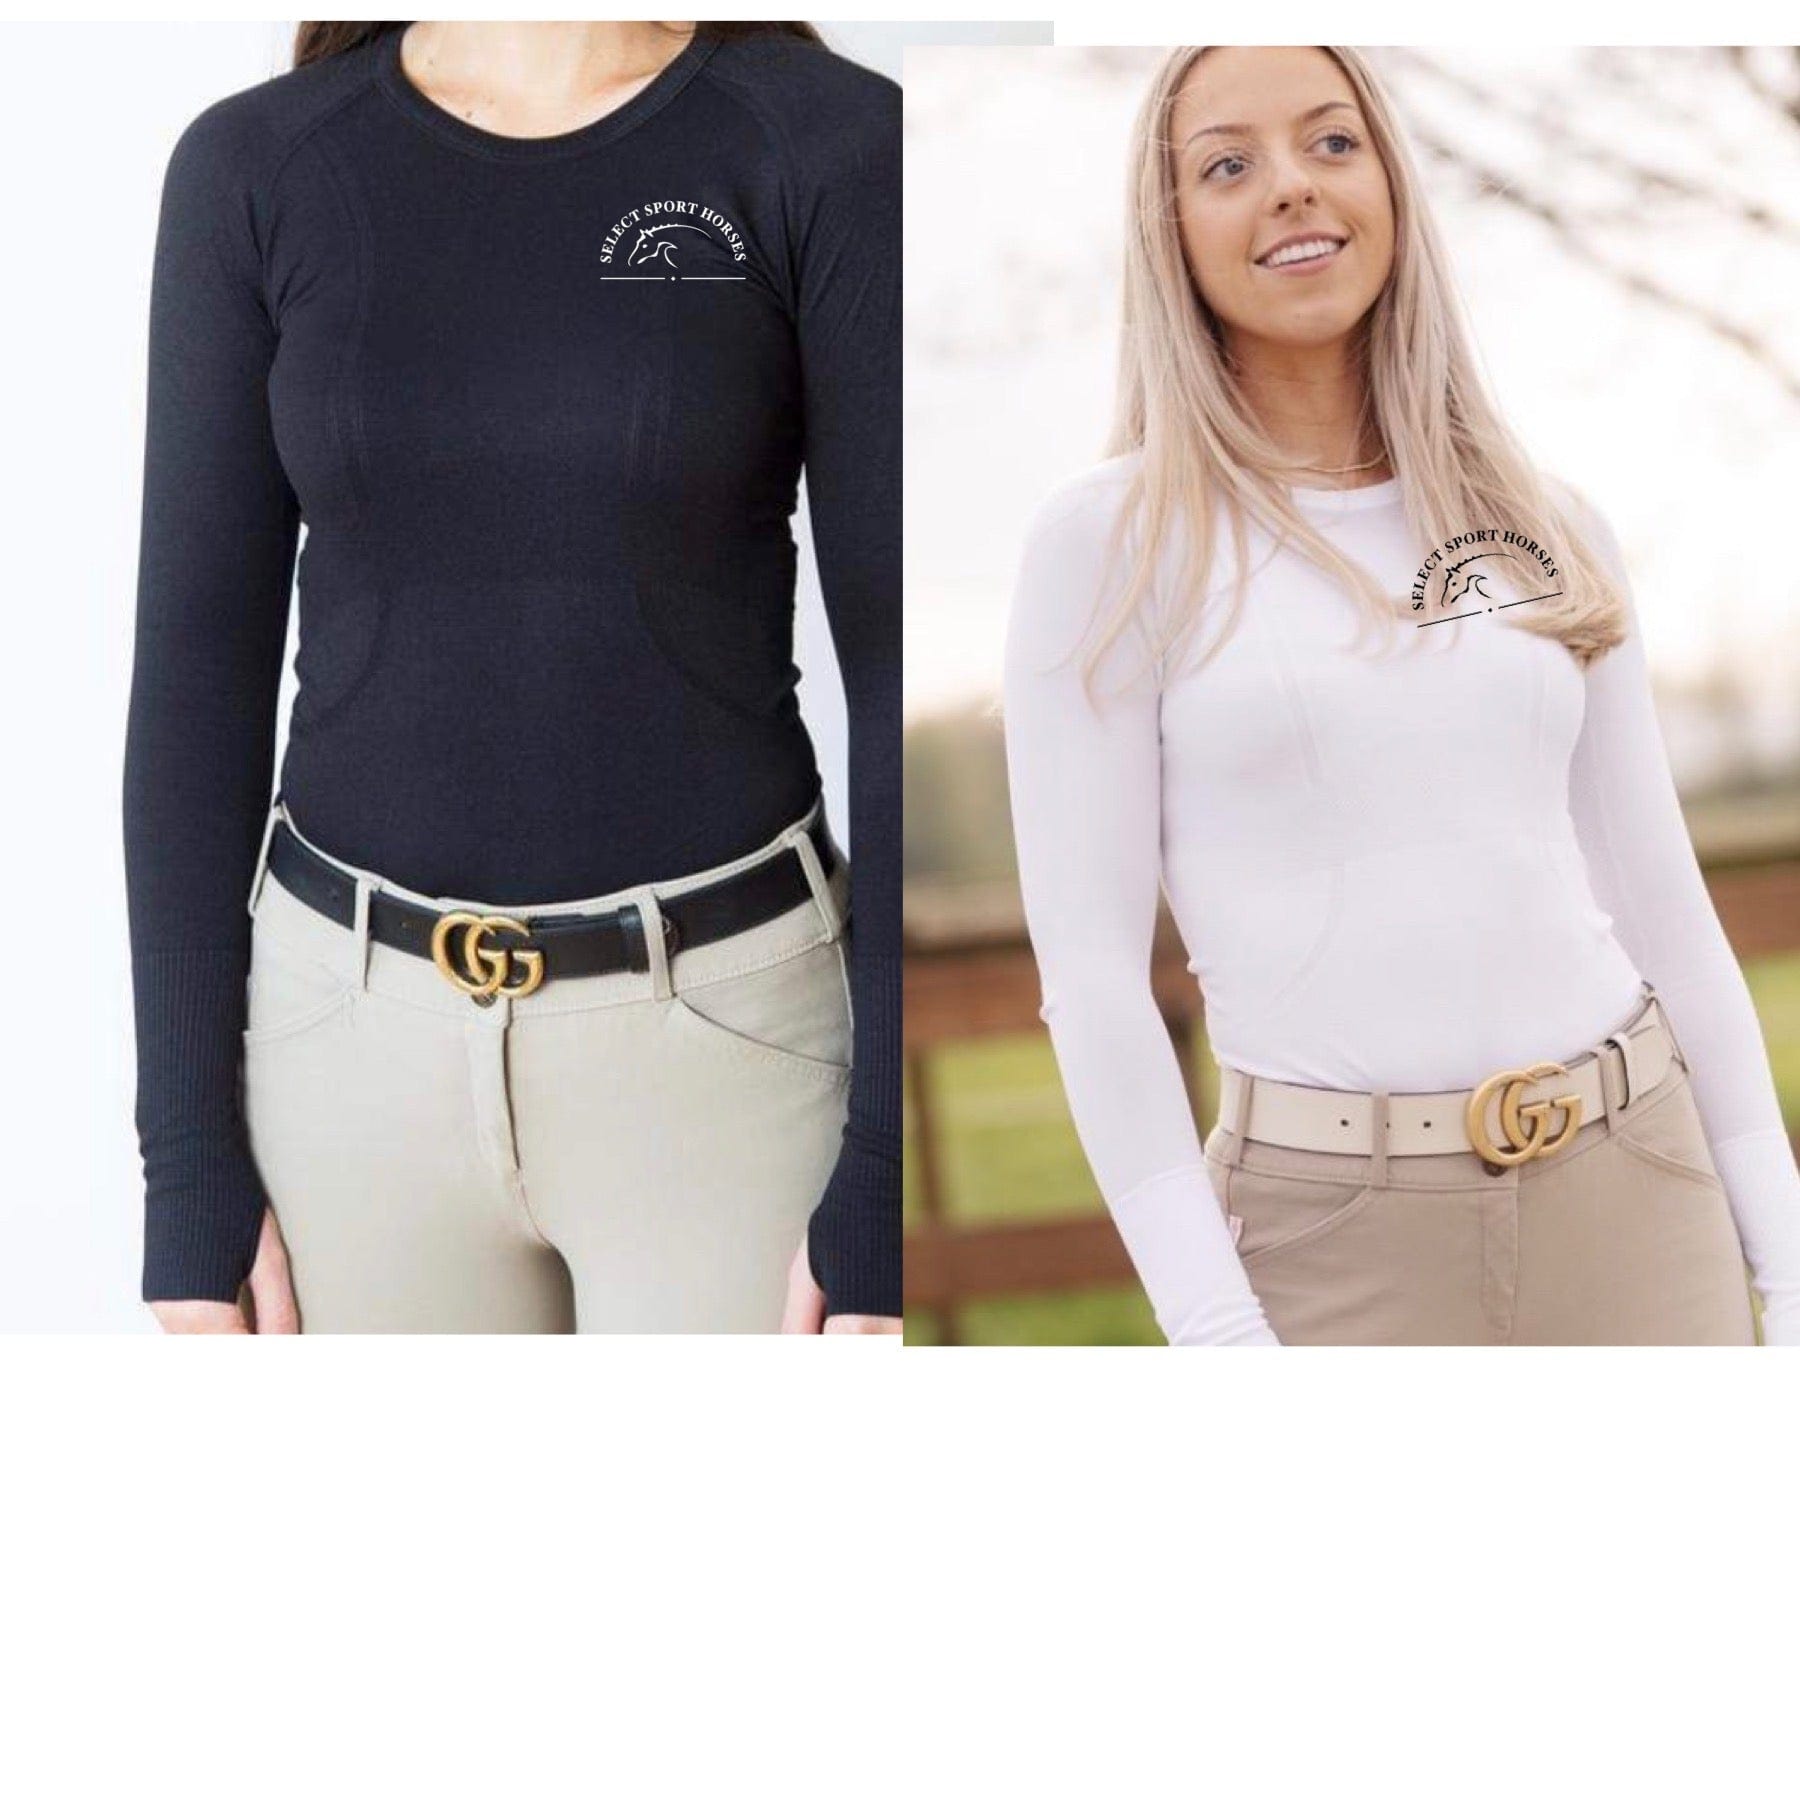 Equestrian Team Apparel Select Sport Horses Tech Shirt equestrian team apparel online tack store mobile tack store custom farm apparel custom show stable clothing equestrian lifestyle horse show clothing riding clothes horses equestrian tack store